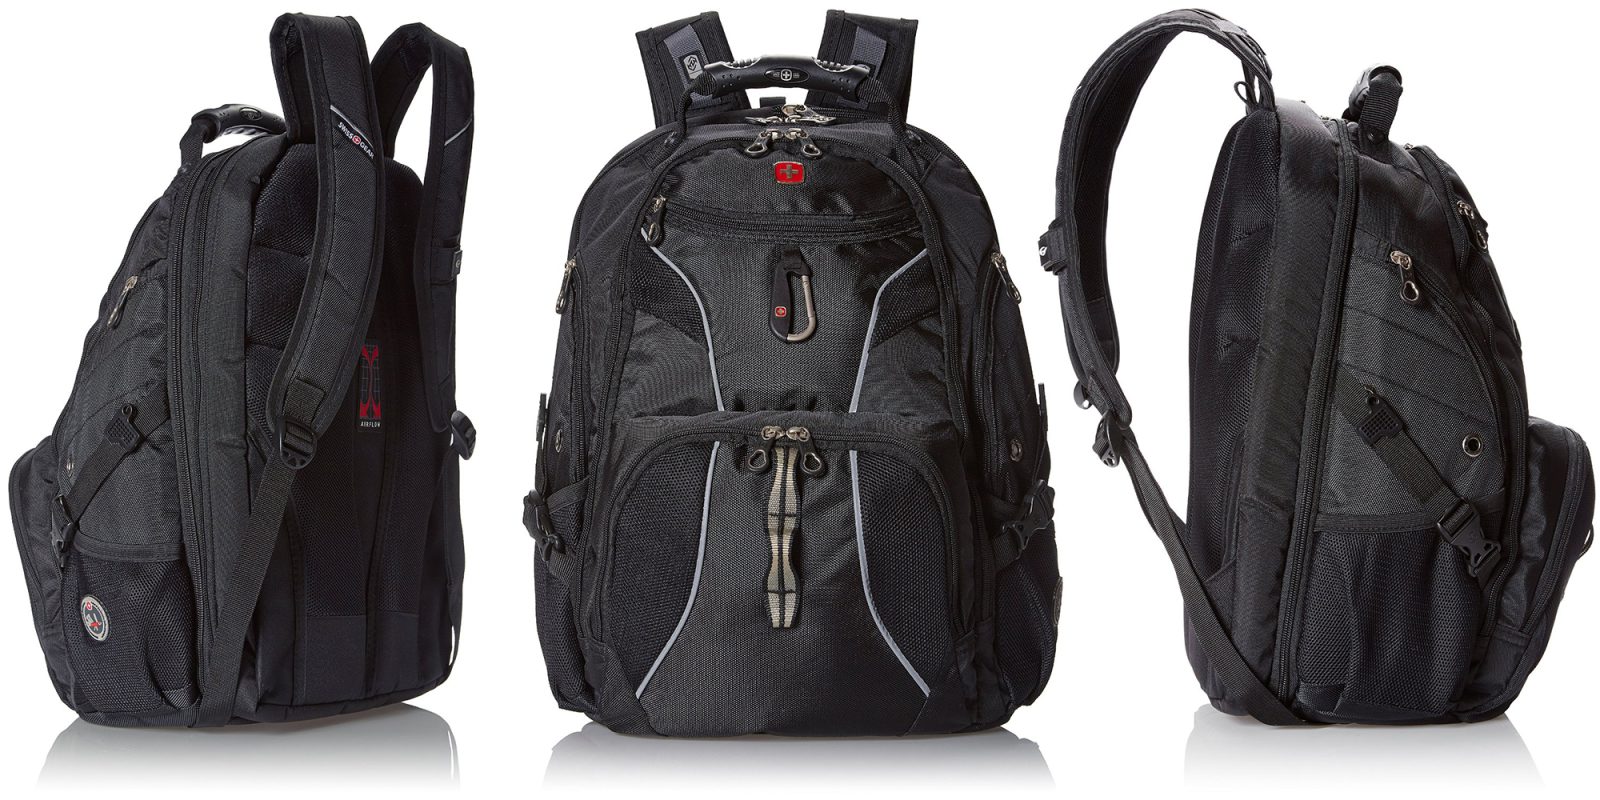 What Are Jansport Backpacks Made Of?